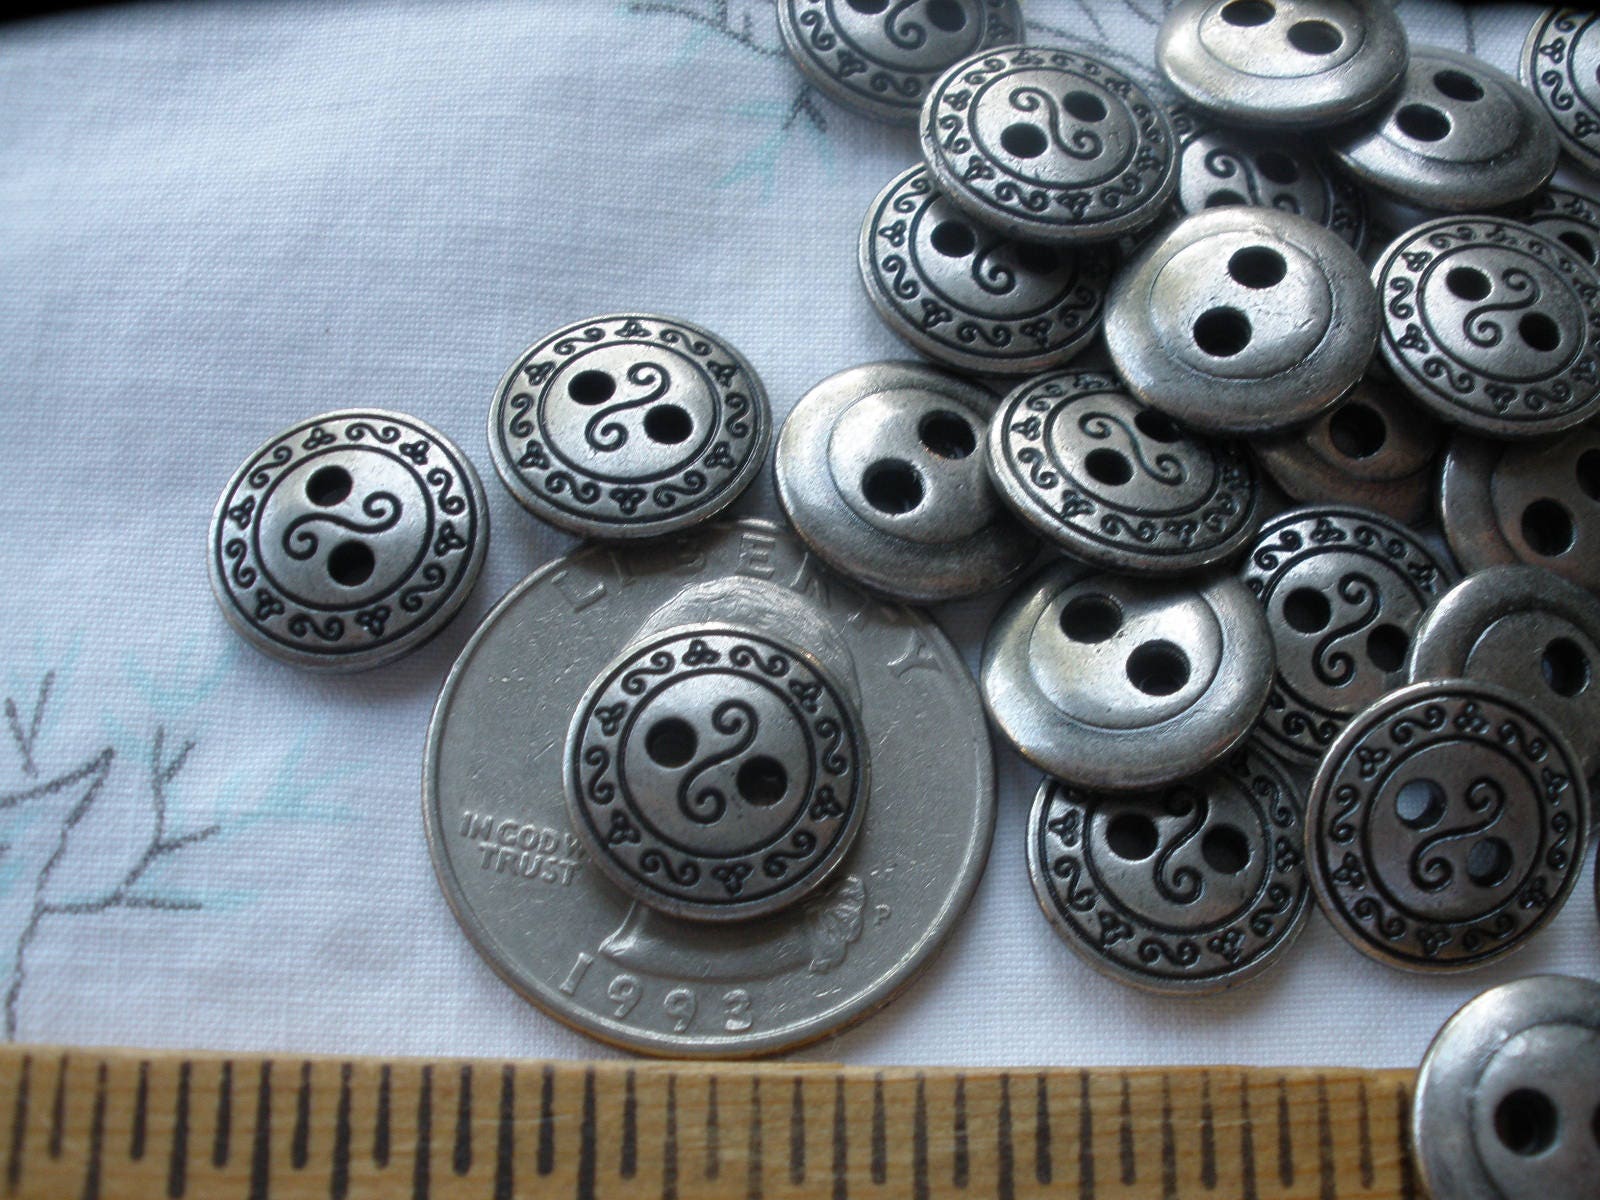 Snake Metal Buttons, Antique Silver, 22mm Round Button, Qty 4 to 8 Clothing  Button or Leather Wrap Clasps 7/8